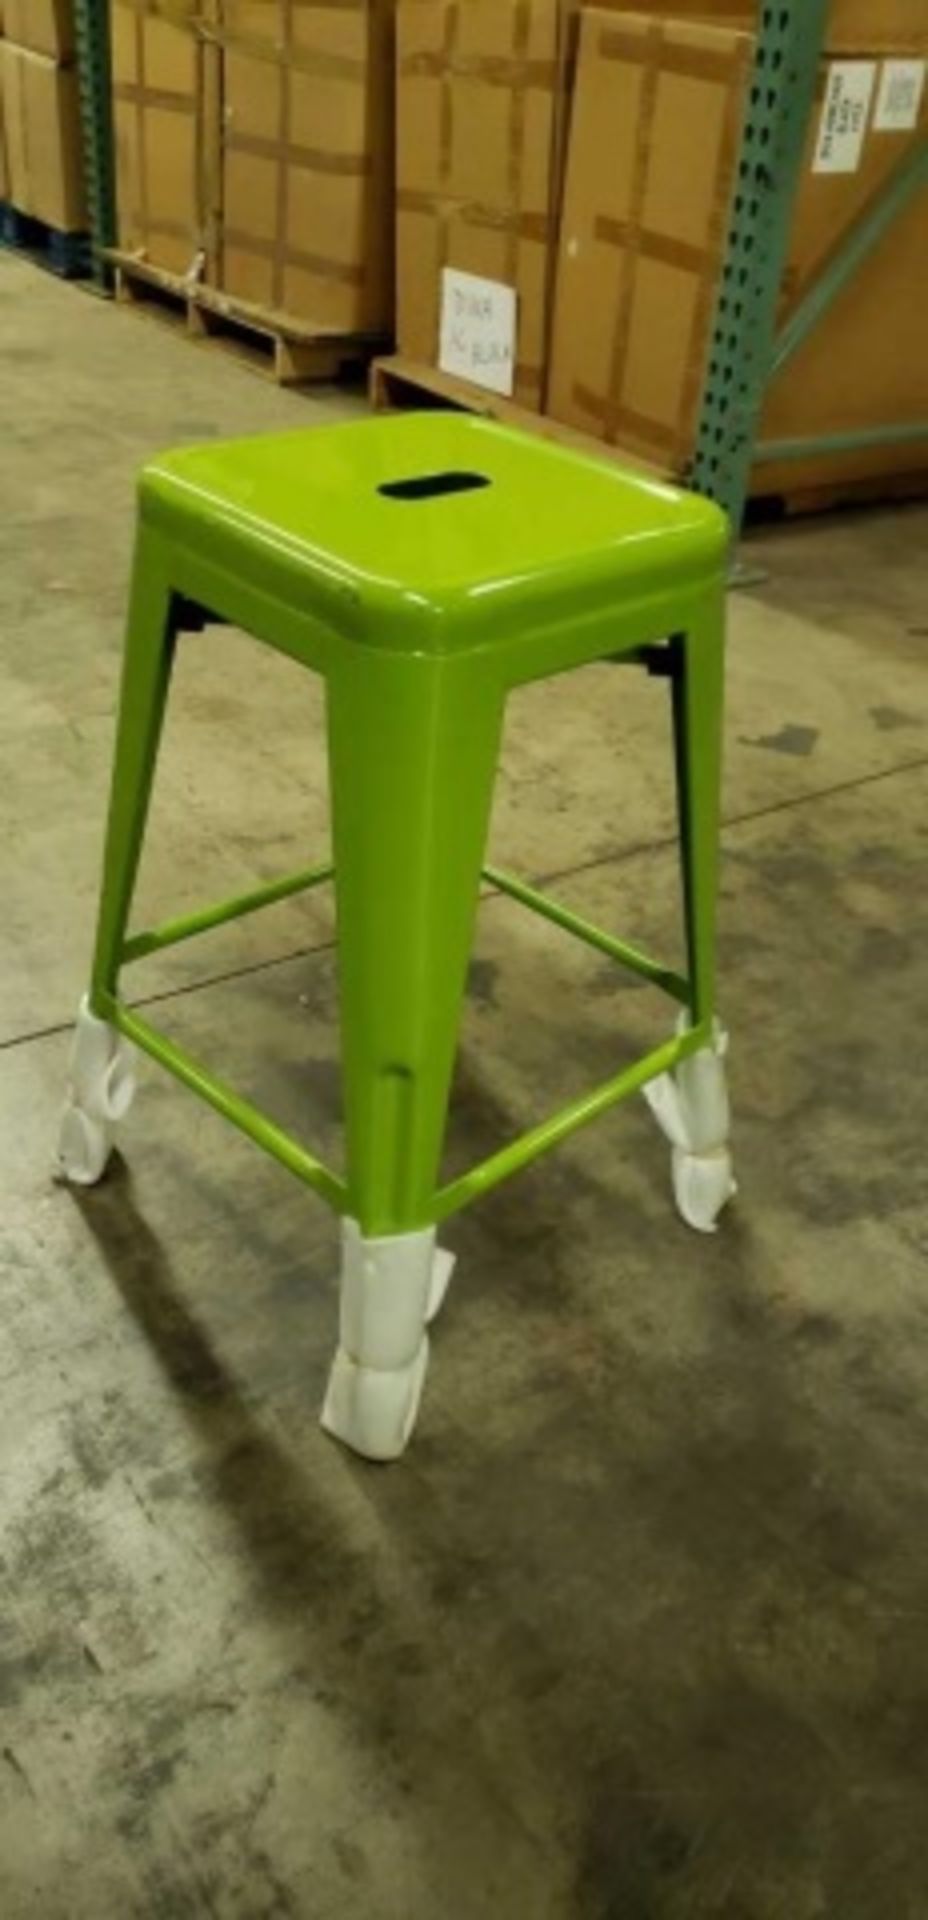 Manhattan Counter Height, Bar Stool - Green. 4 per box, 7 boxes, 24 total. - Image 3 of 5